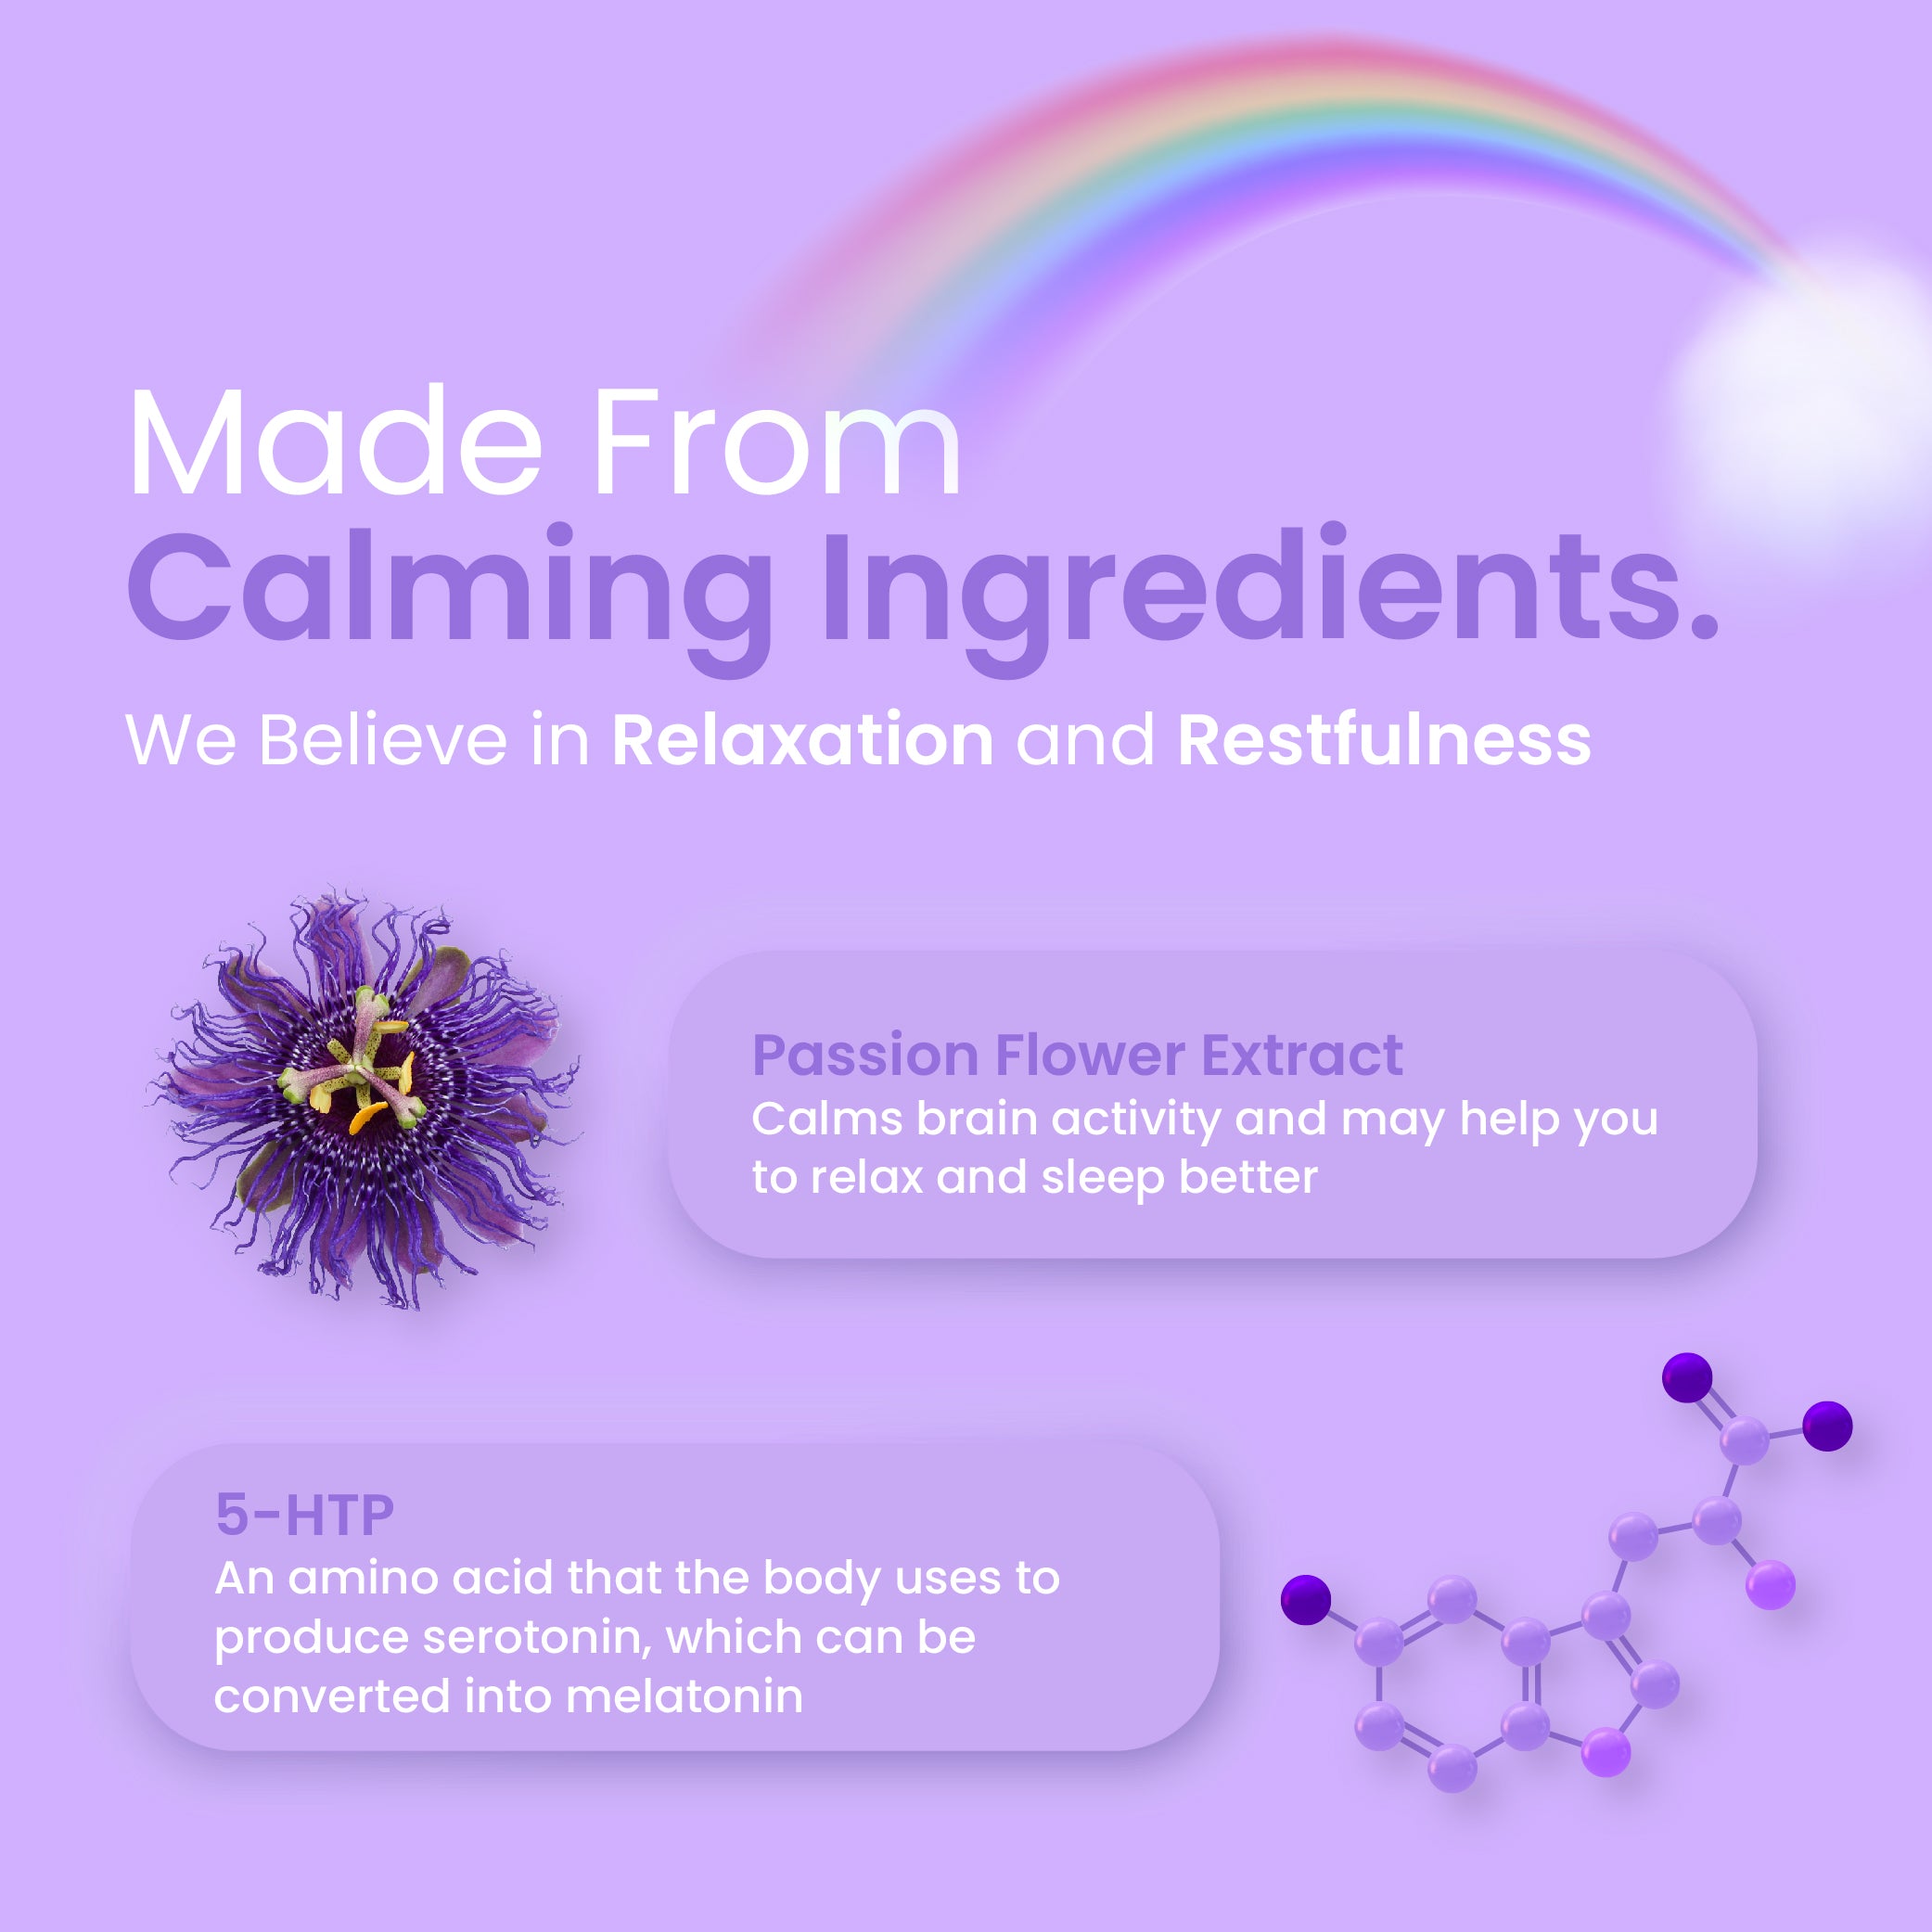 **Discover the Mesmerizing Magic of Lavender Elixirs: Crafting Exquisite Purple Potion Recipes to Enchant Your Senses**